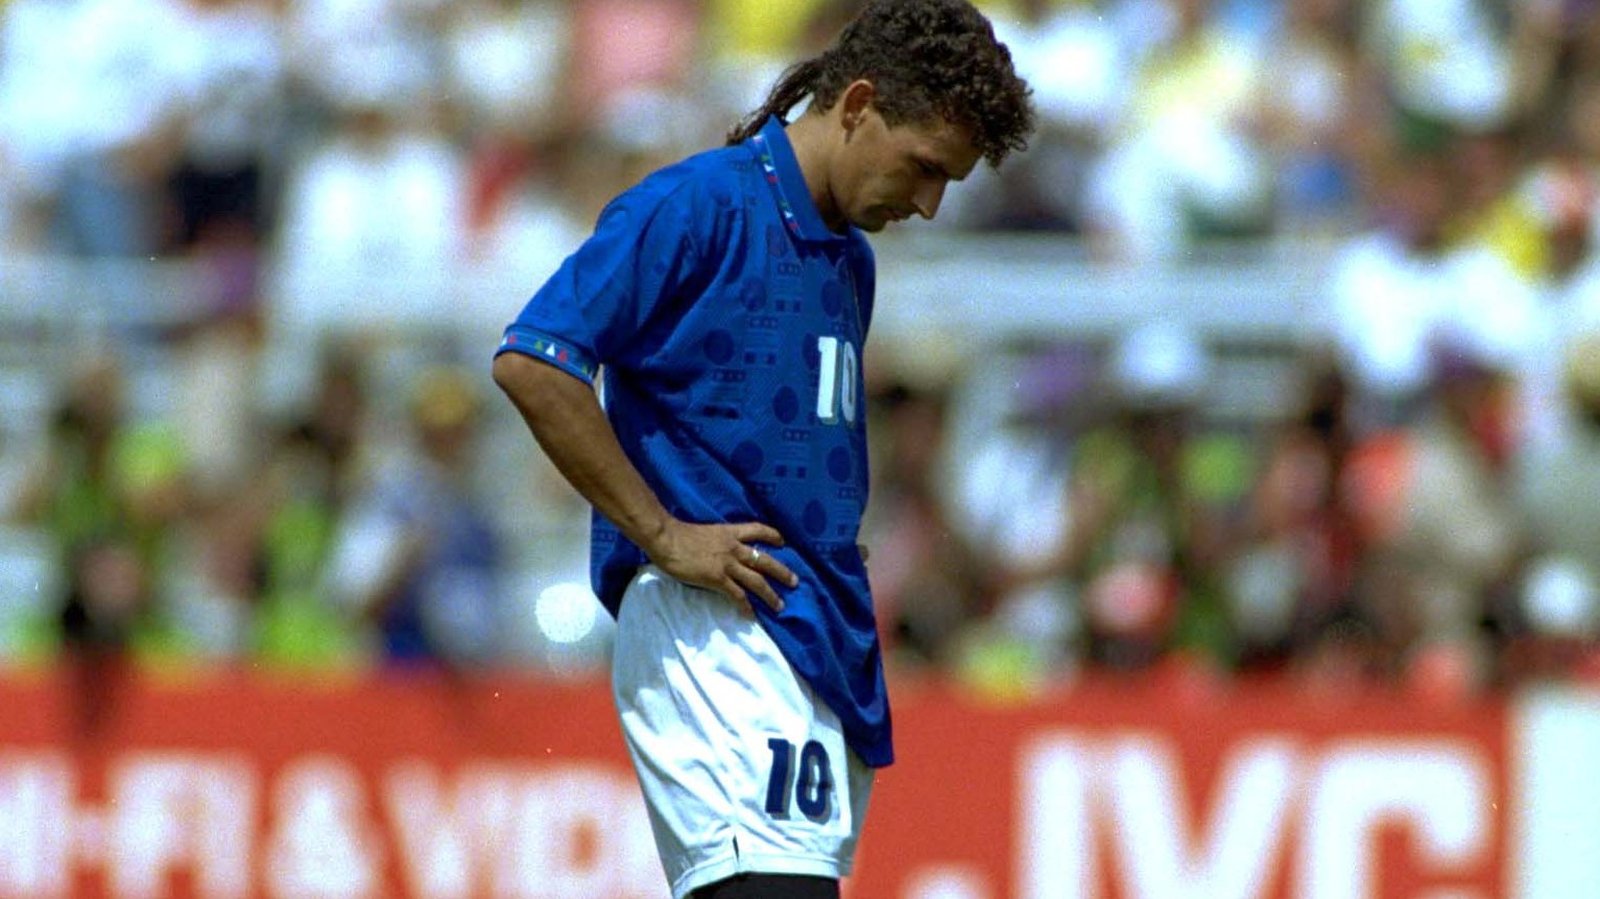  Roberto Baggio looks down in dejection after missing a penalty kick in the 1994 FIFA World Cup Final against Brazil.